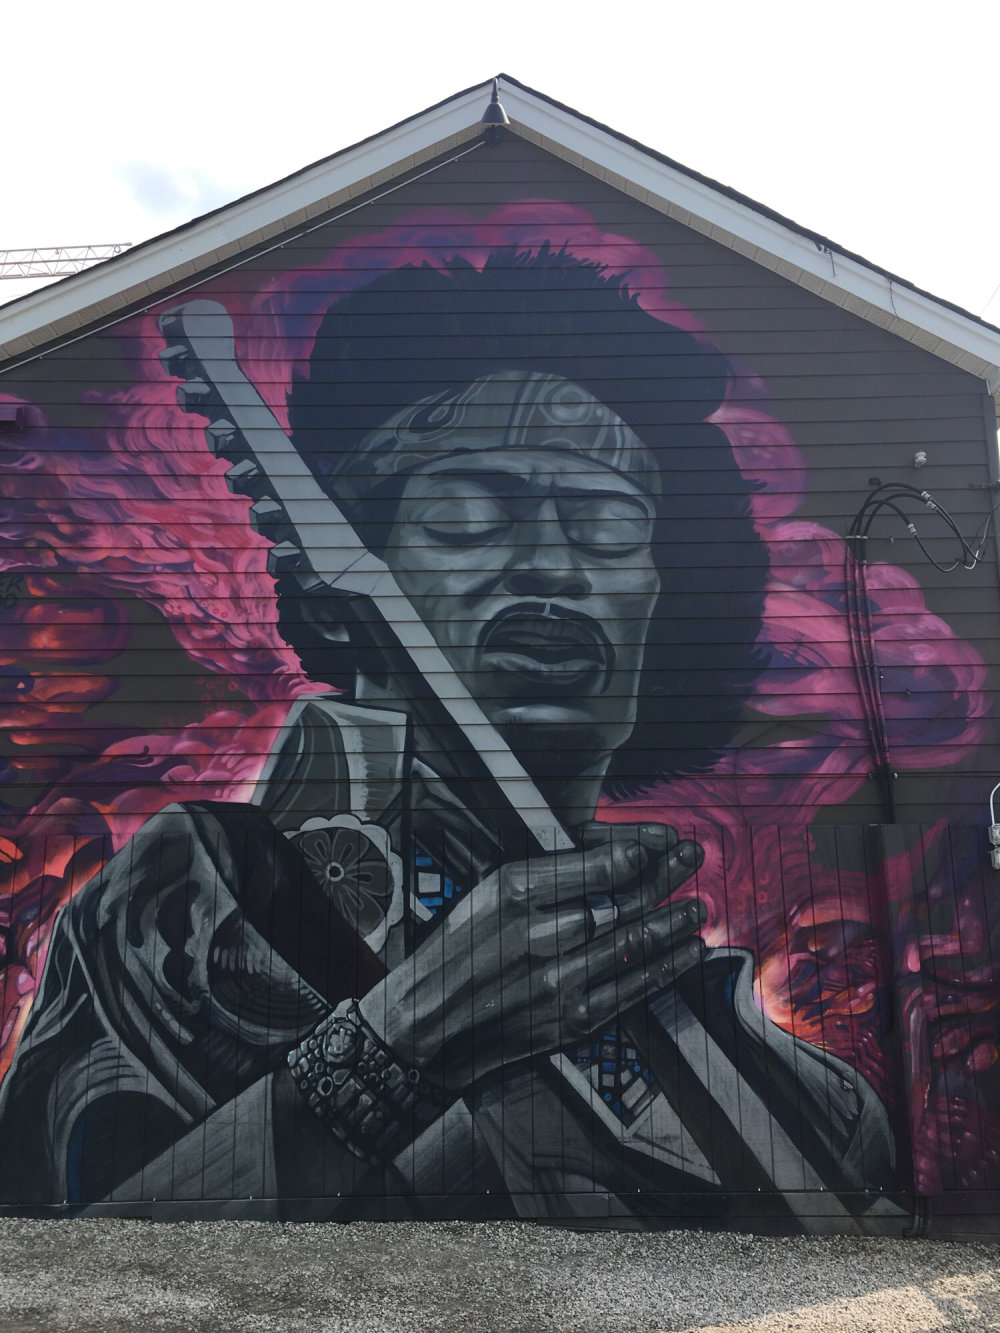 mural in Toronto by artist uber5000. Tagged: Jimi Hendrix, music